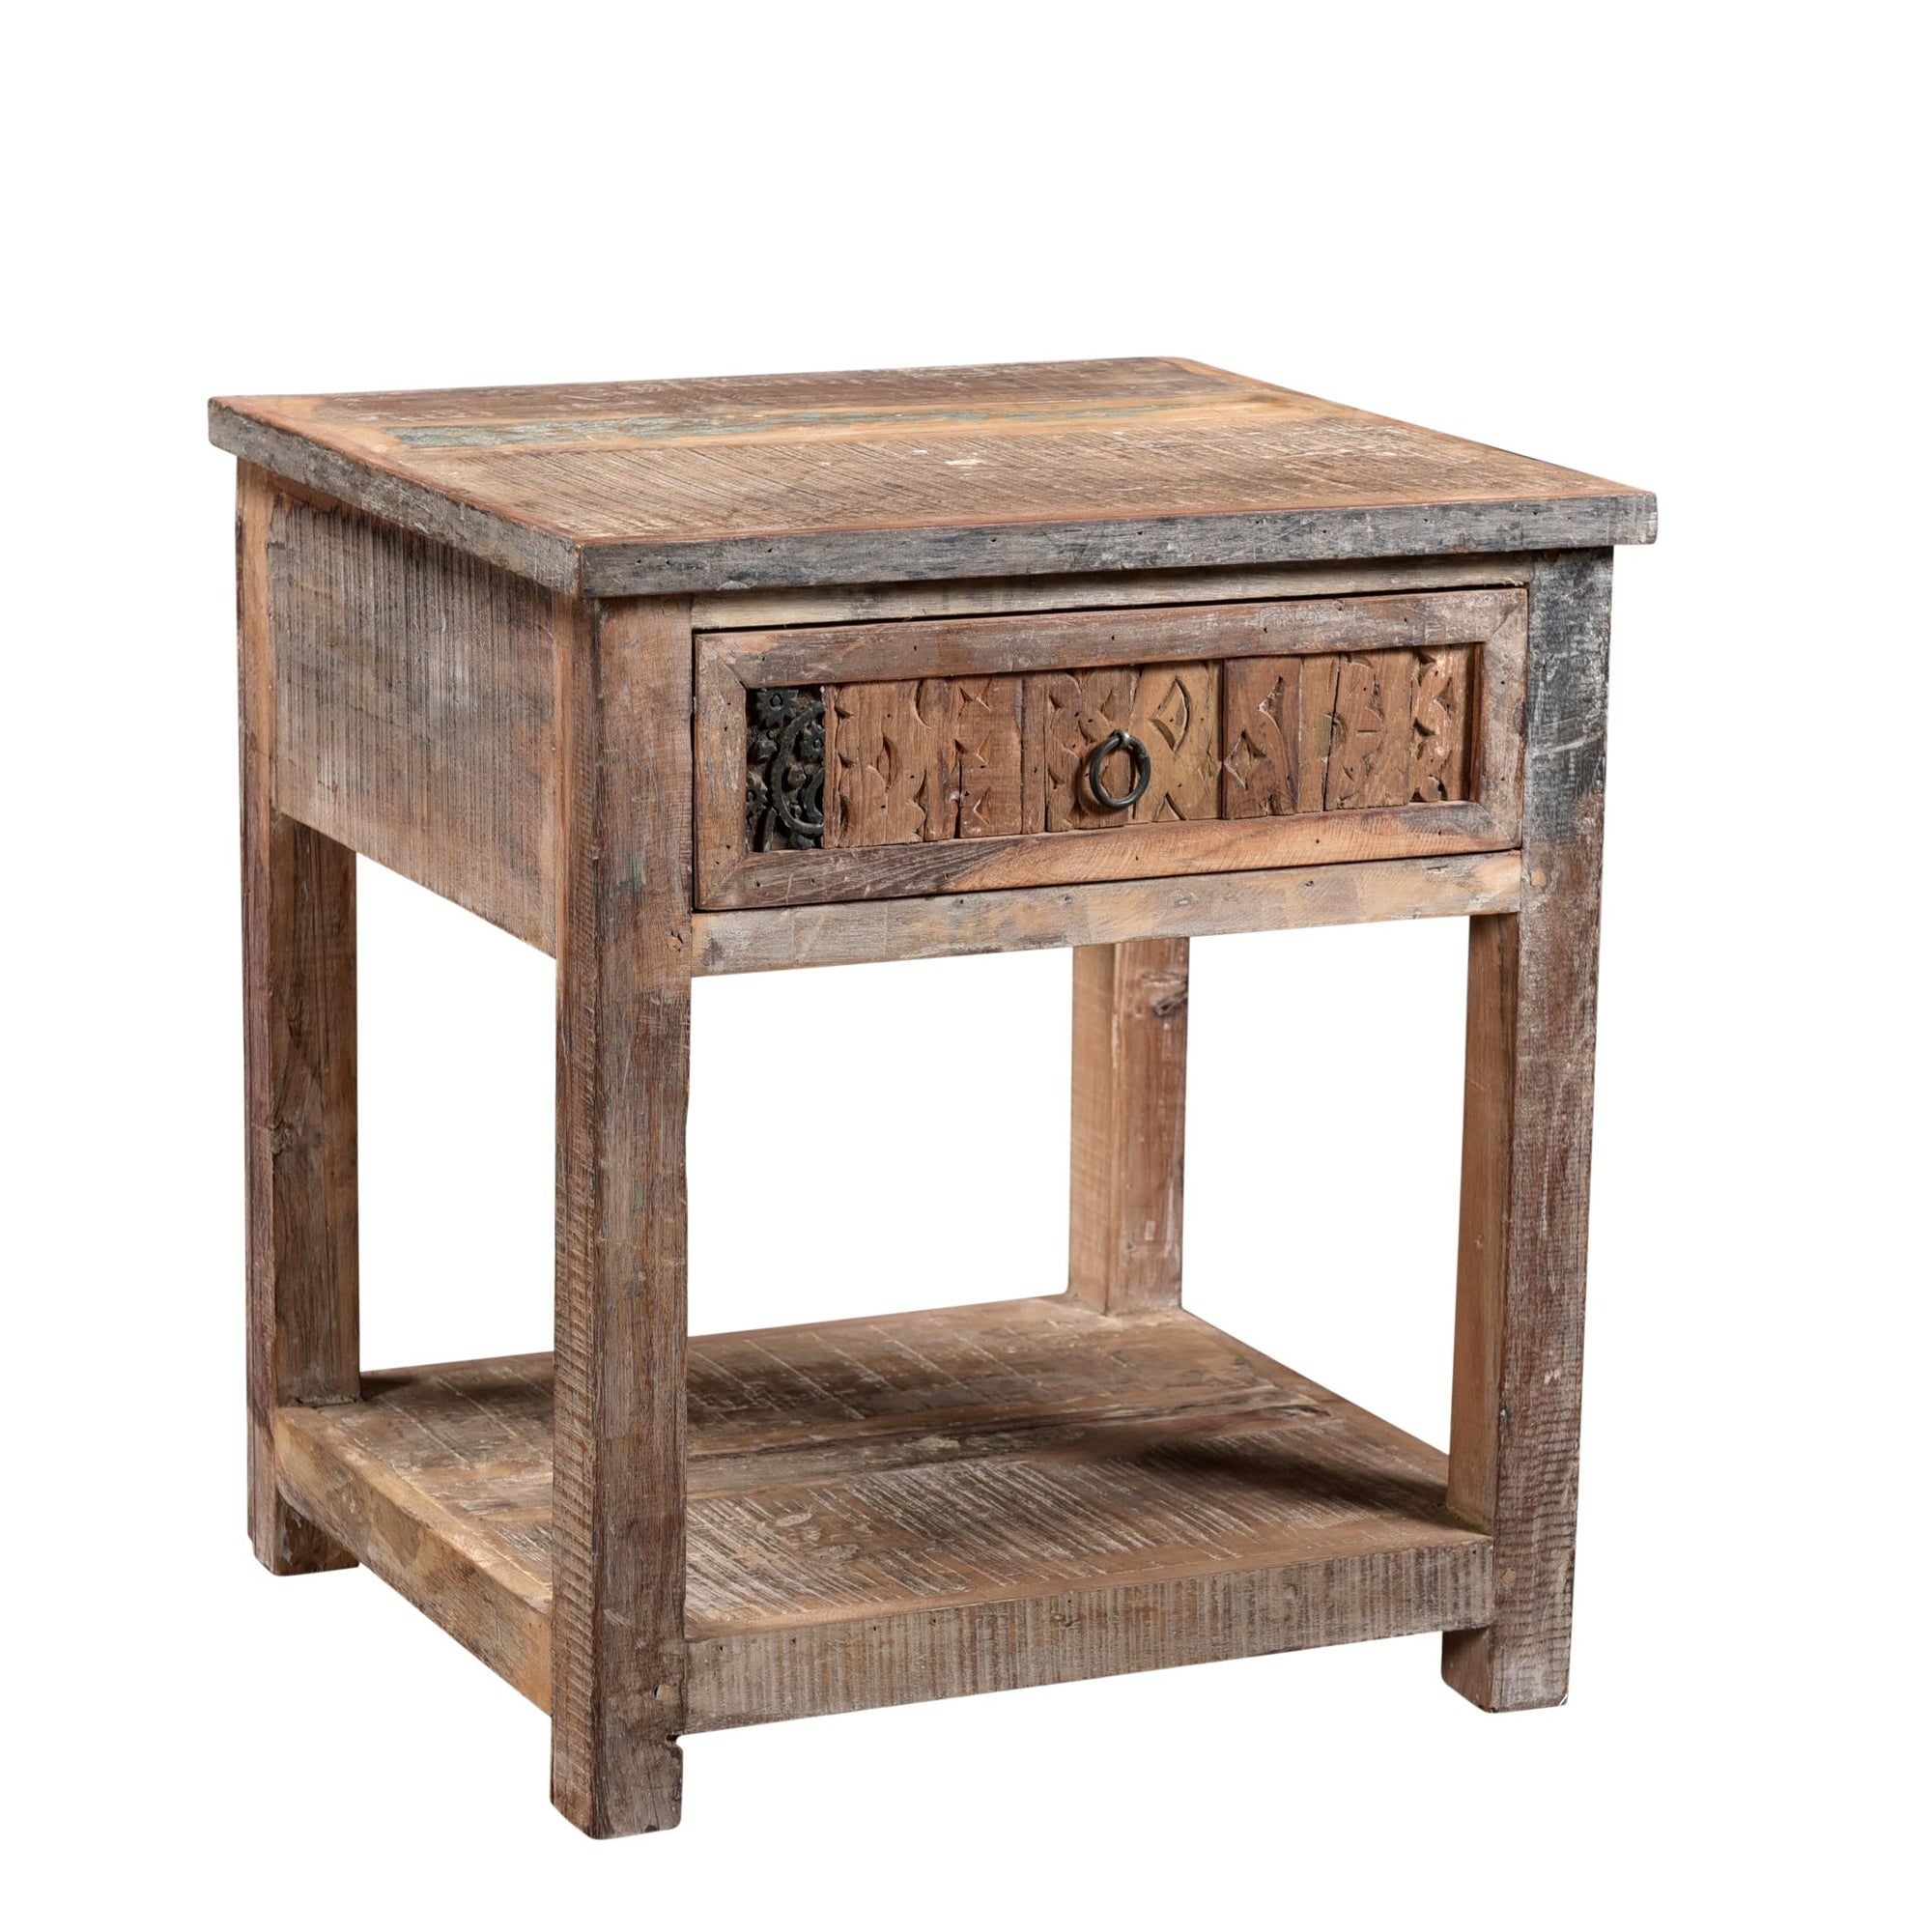 Side Table with Drawer From Reclaimed wood
Ade From Reclaimed Windows -  61.5 x 51.5 x 67 (wxdxh cms) - A00041V2